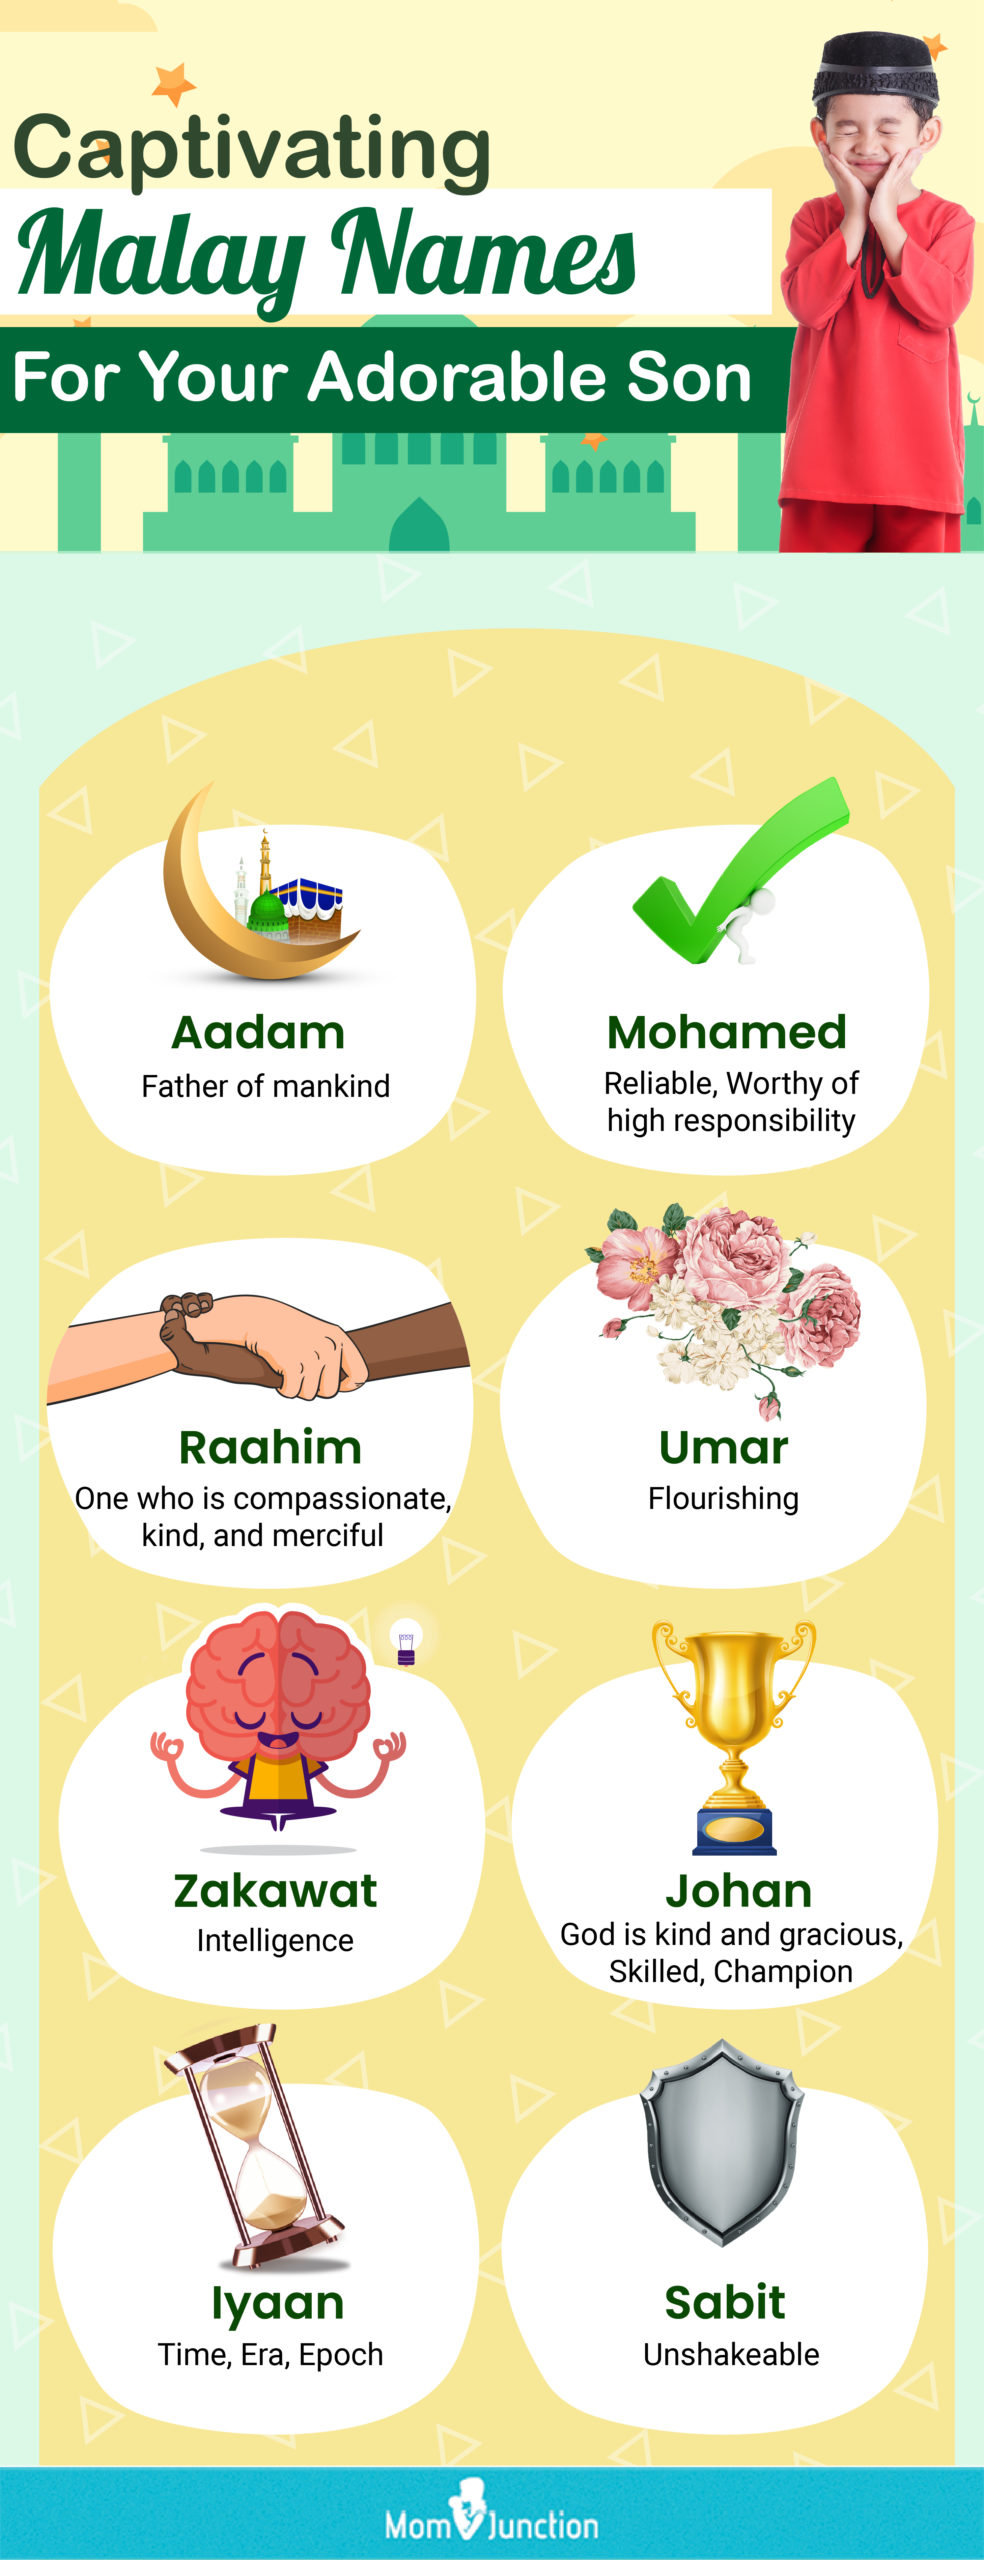 indigenous malay names with meanings for baby boys (infographic)